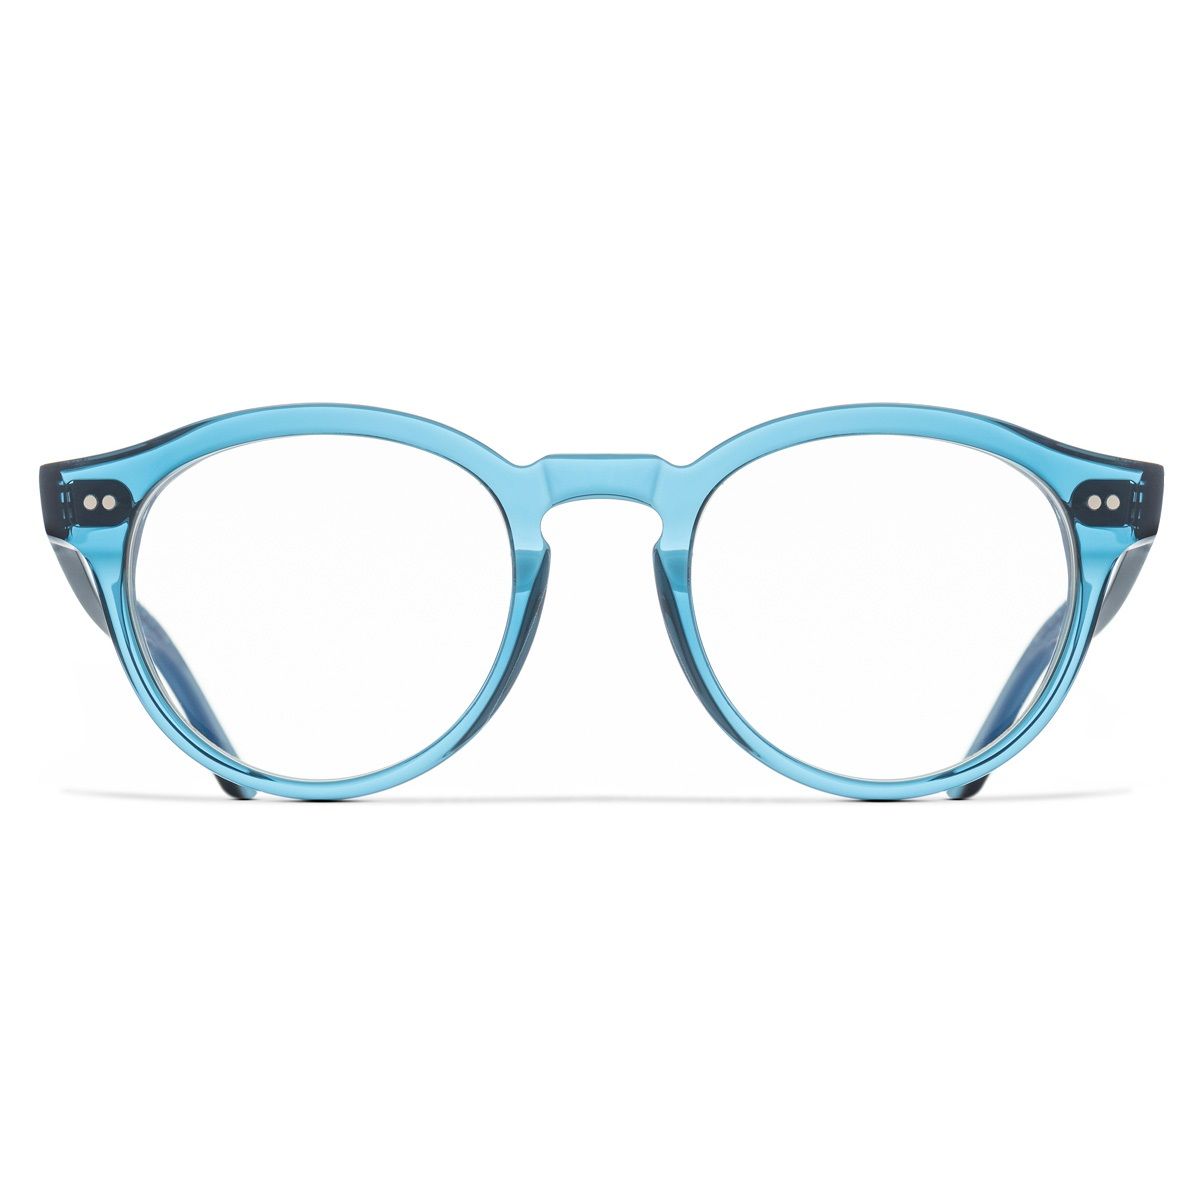 Cutler and Gross, 1378 Optical Round Glasses - Deep Teal